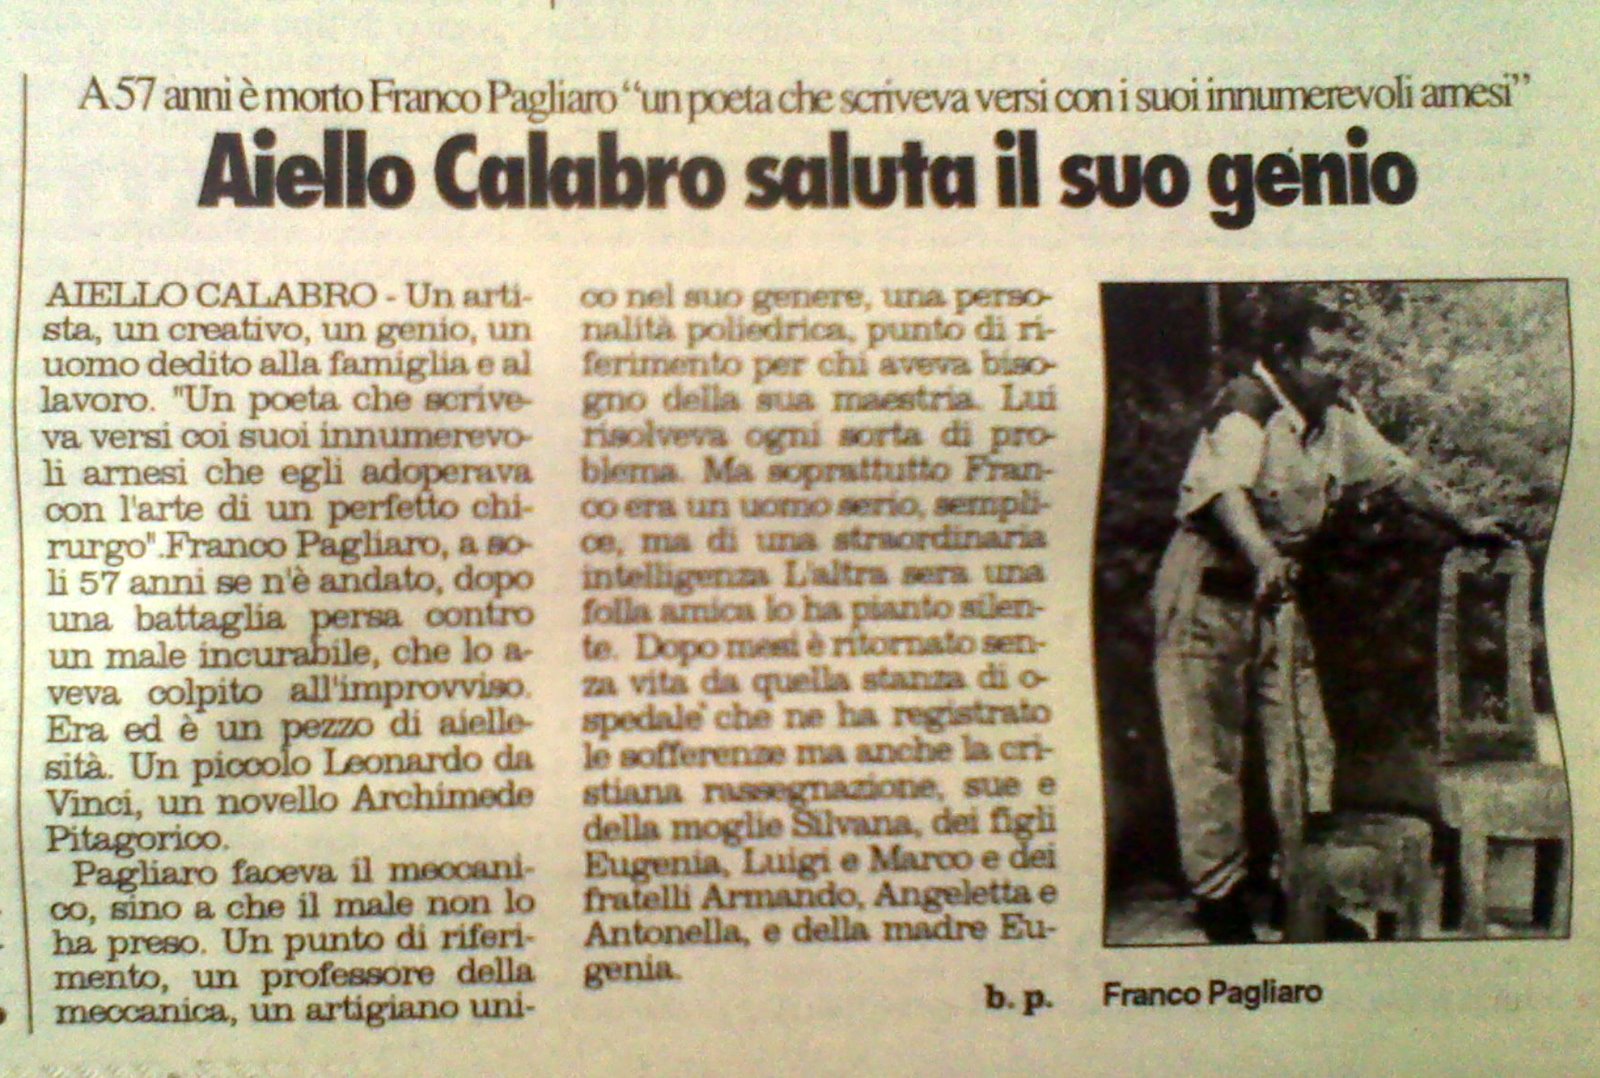 Thumbnail image for /public/upload/2011/7/634469188954439793_Il Quotidiano 23.07.2001.jpg